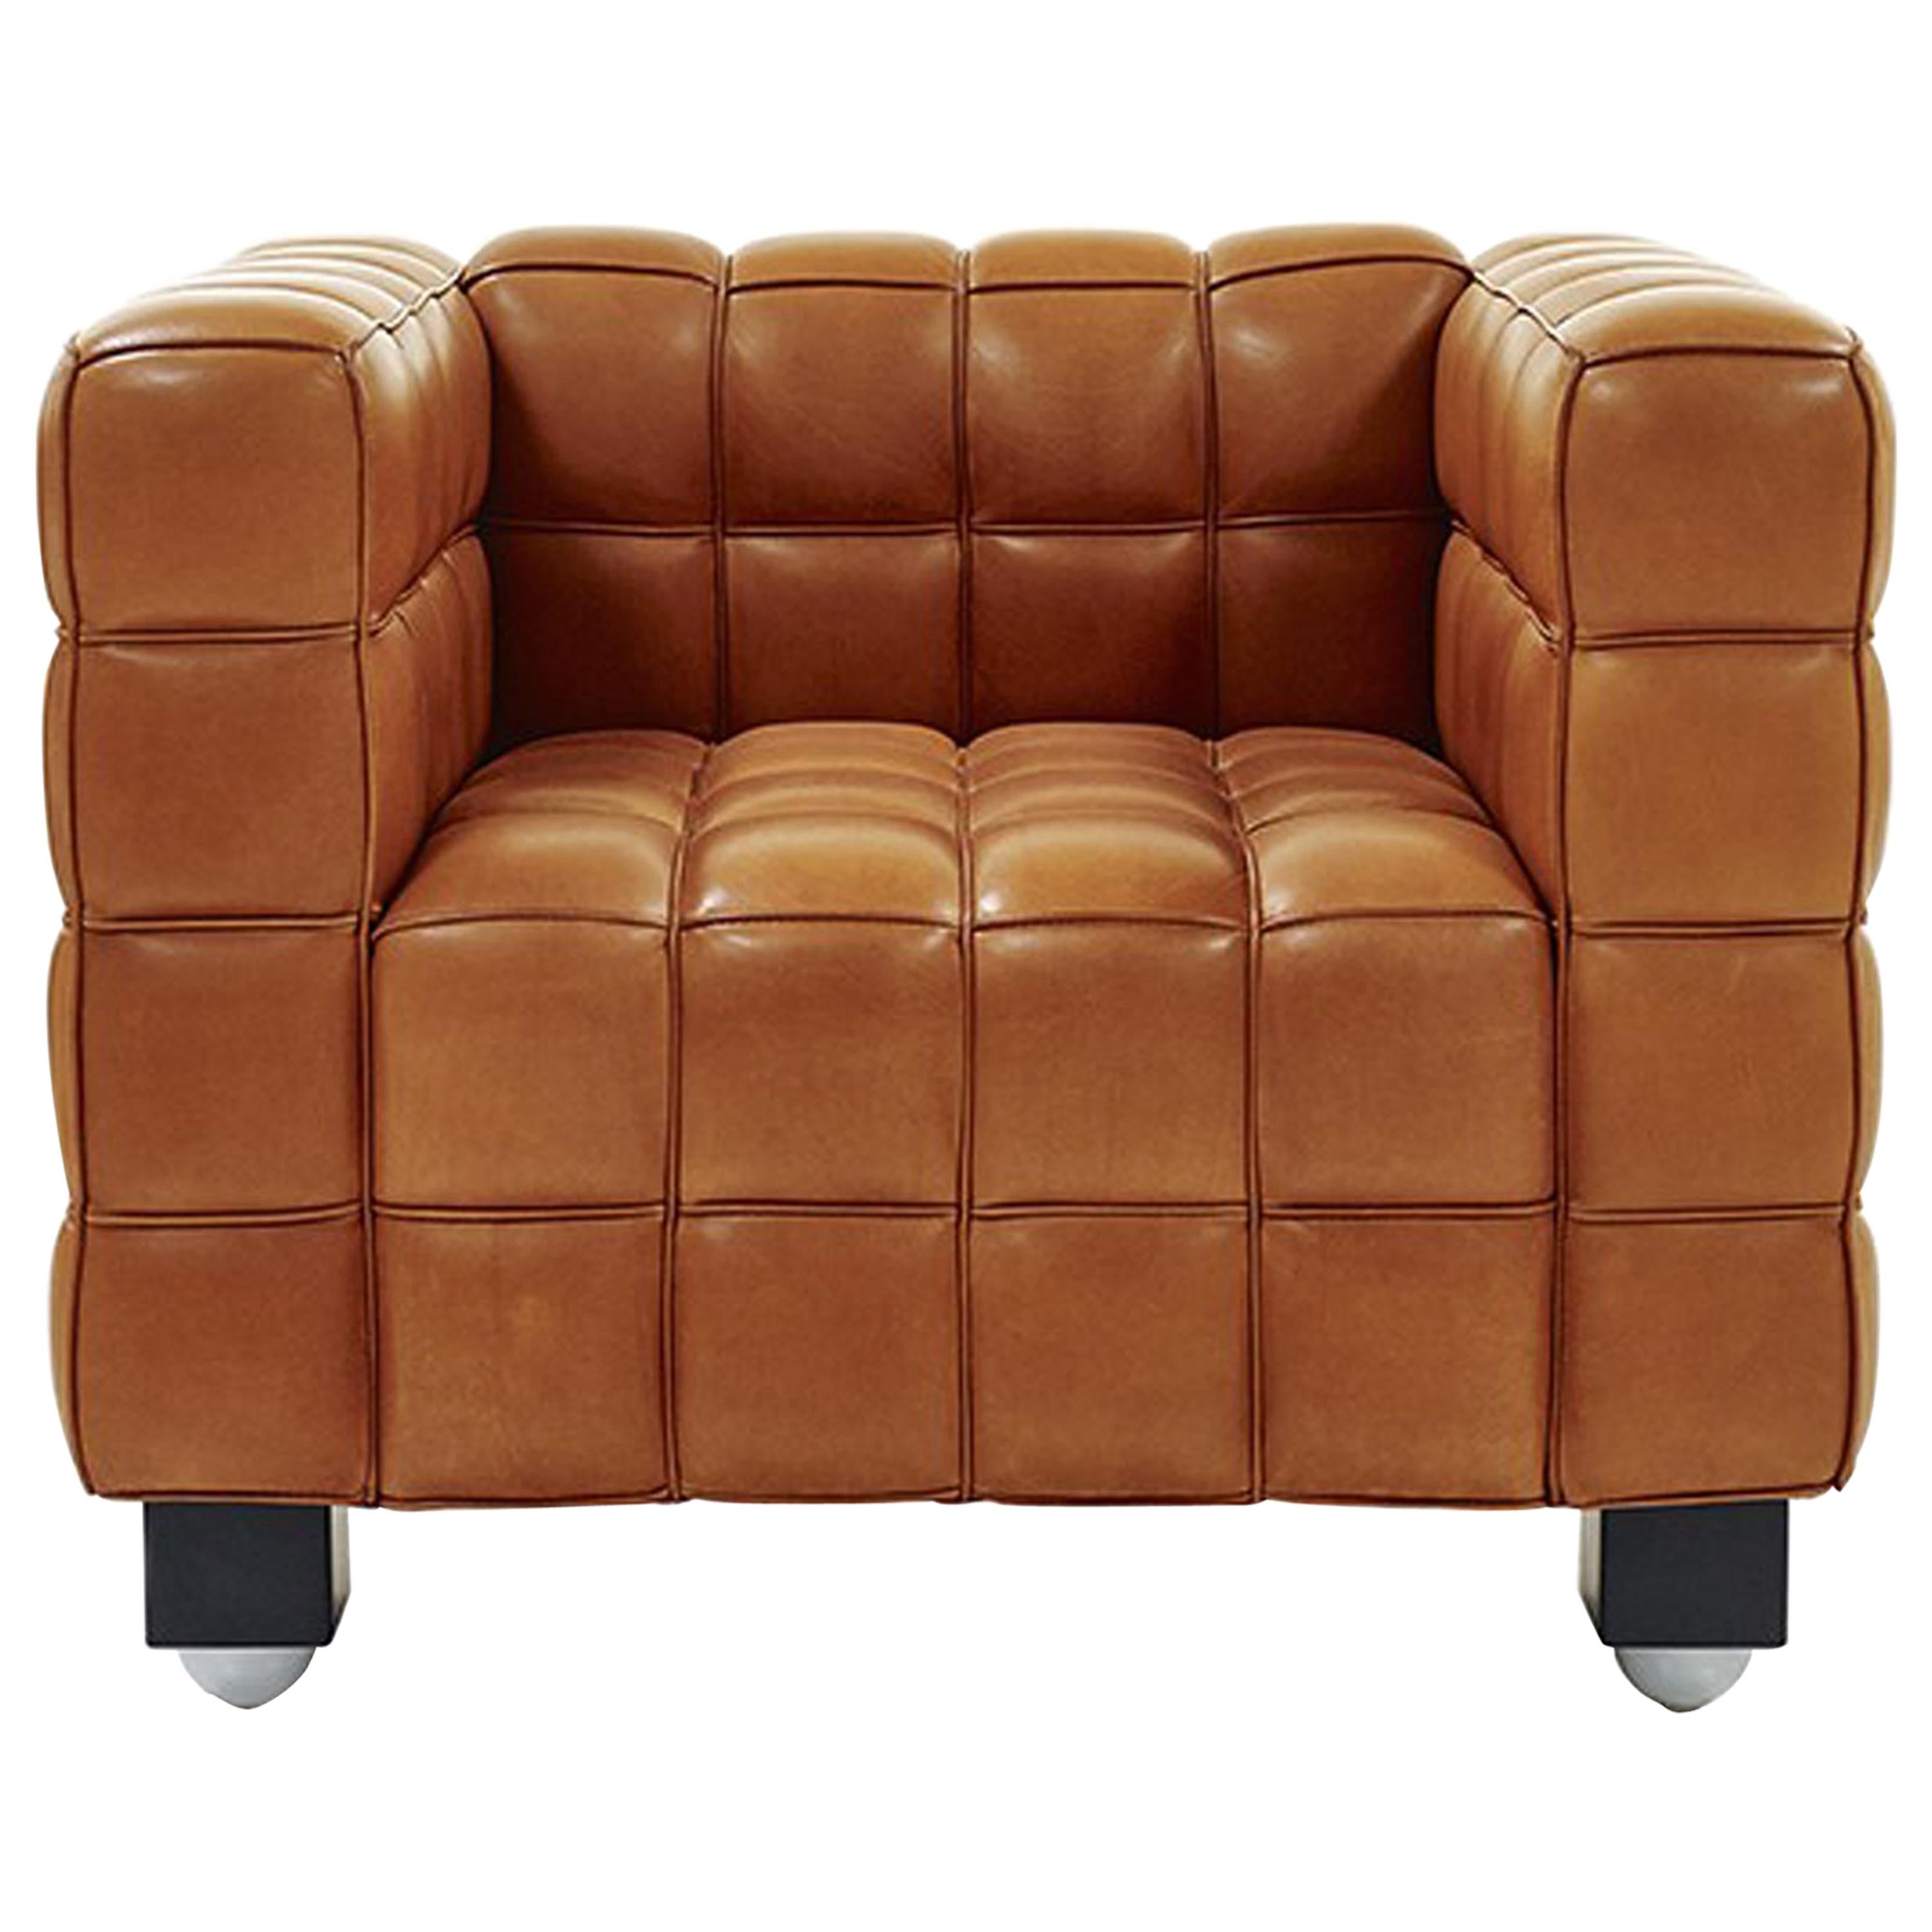 Natural Leather Kubus Design by Josef Hoffmann